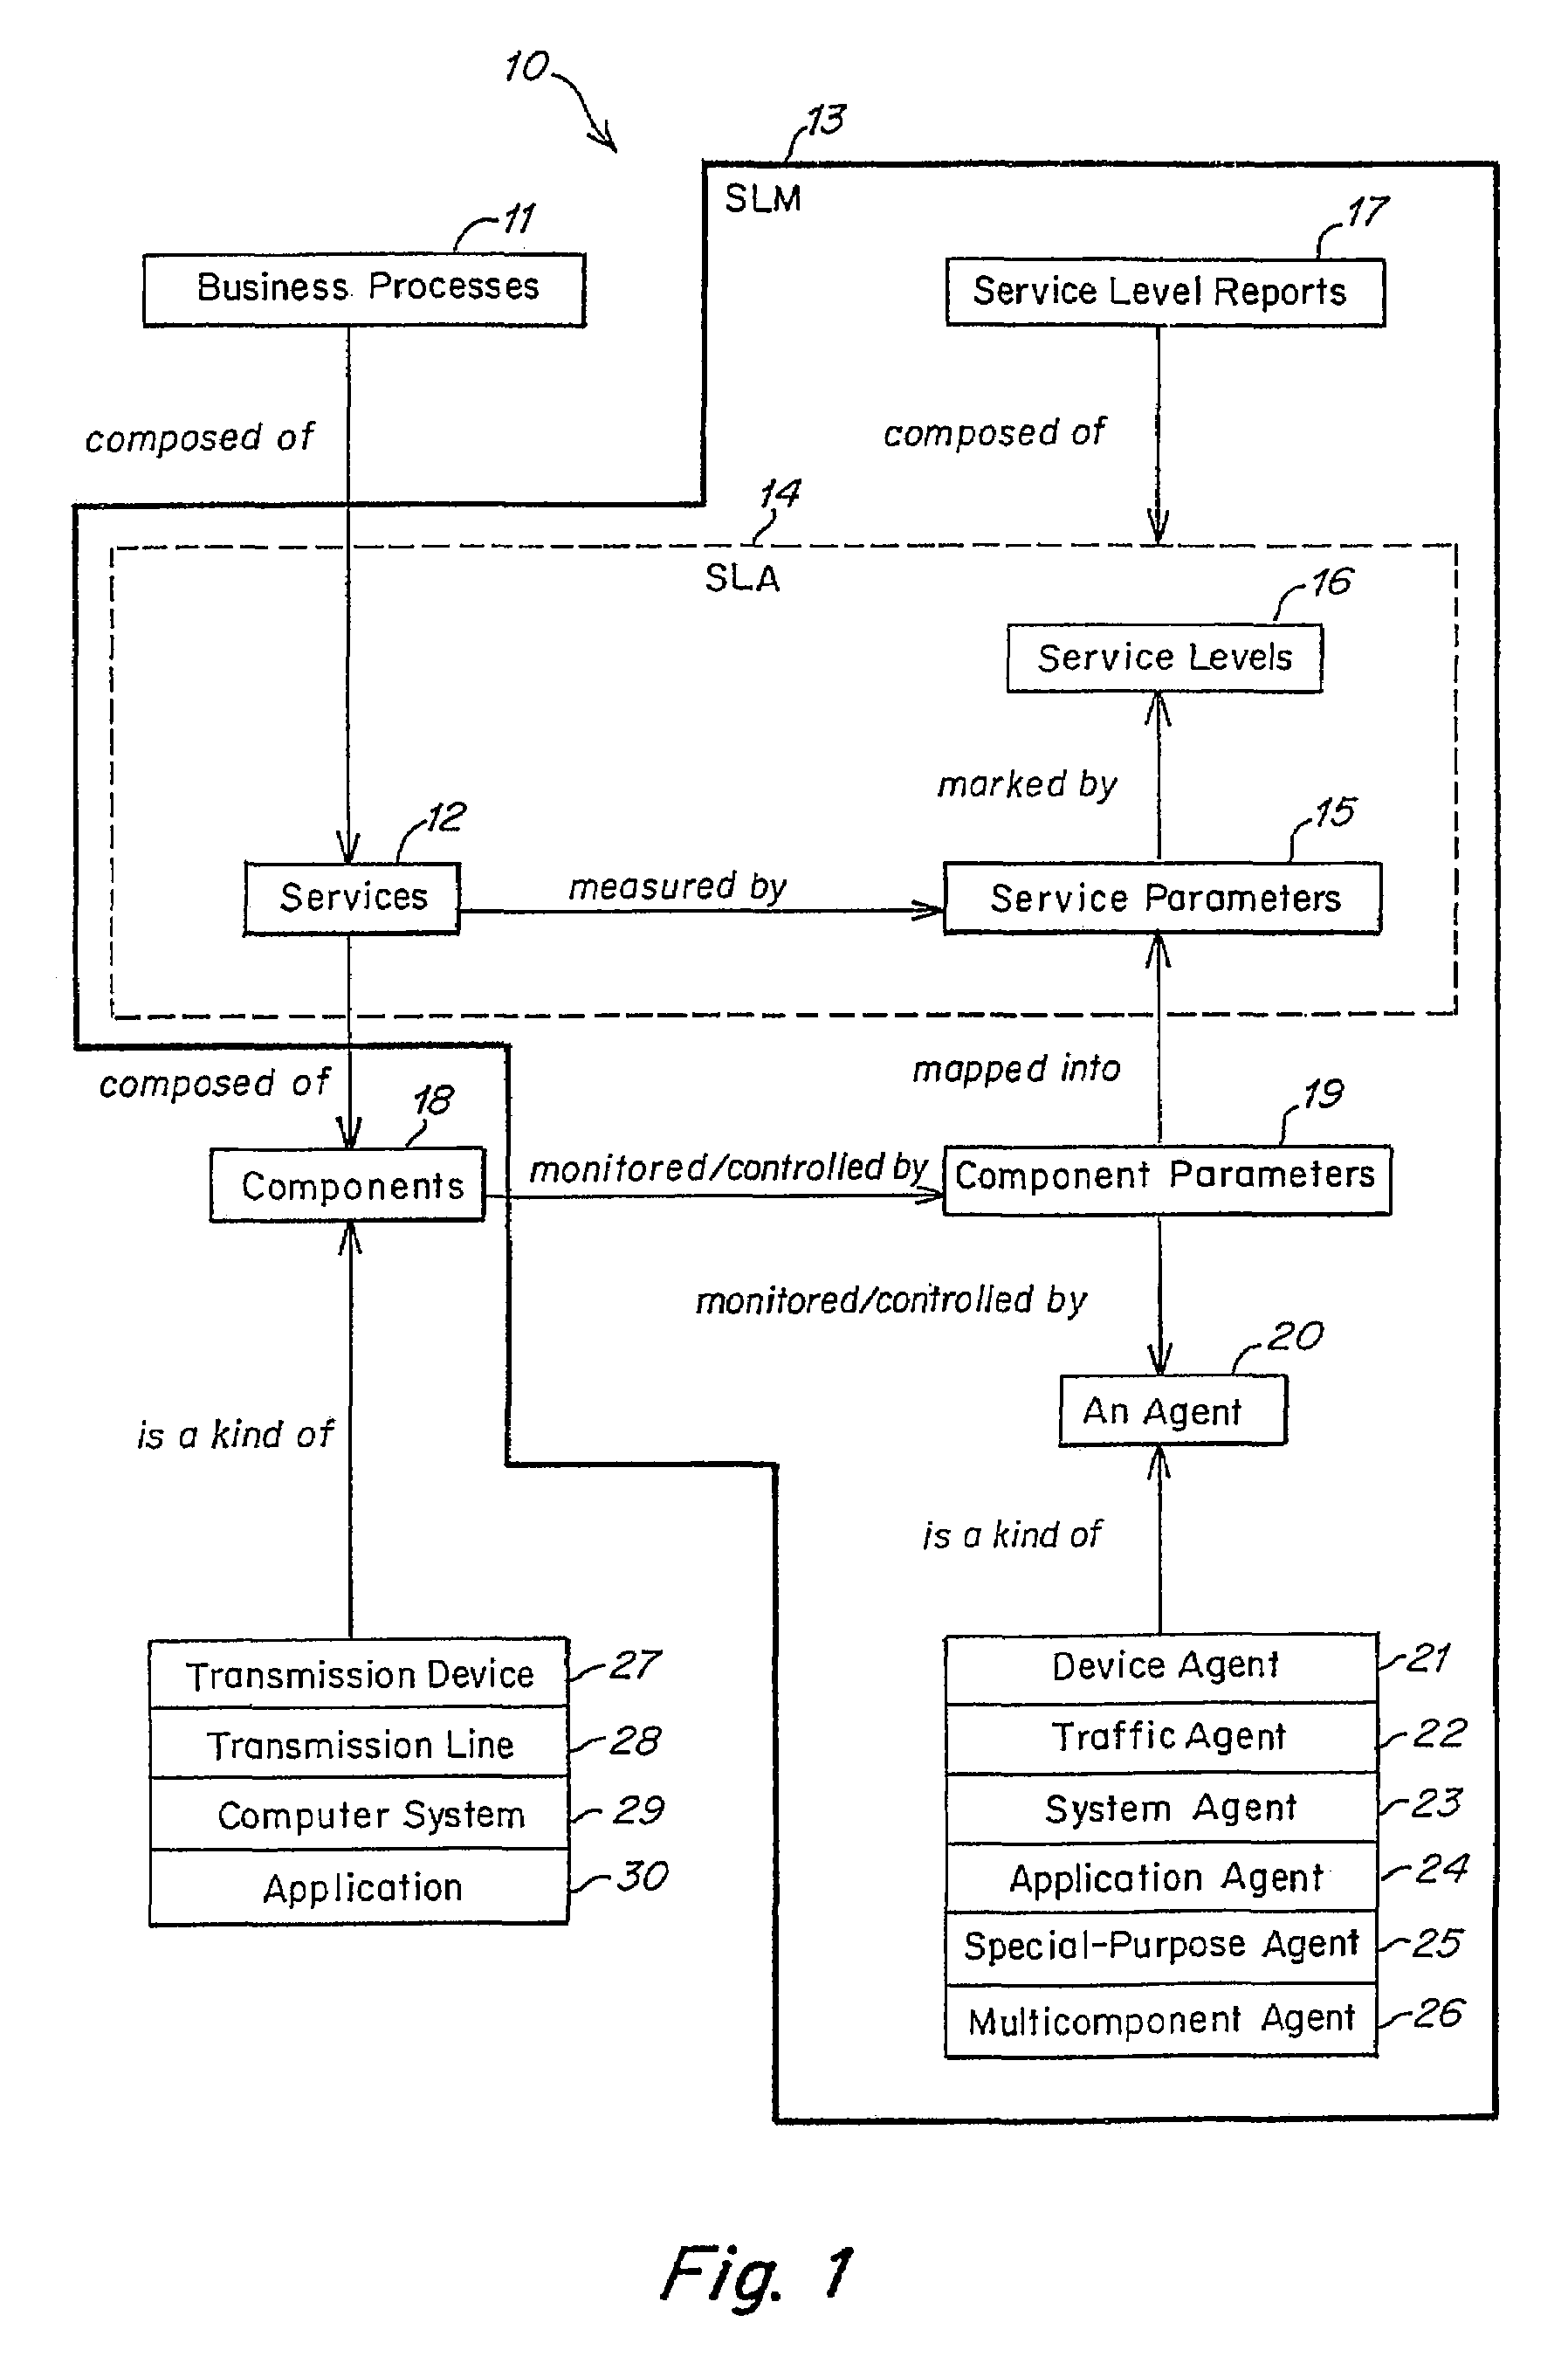 Method and apparatus for event correlation in service level management (SLM)